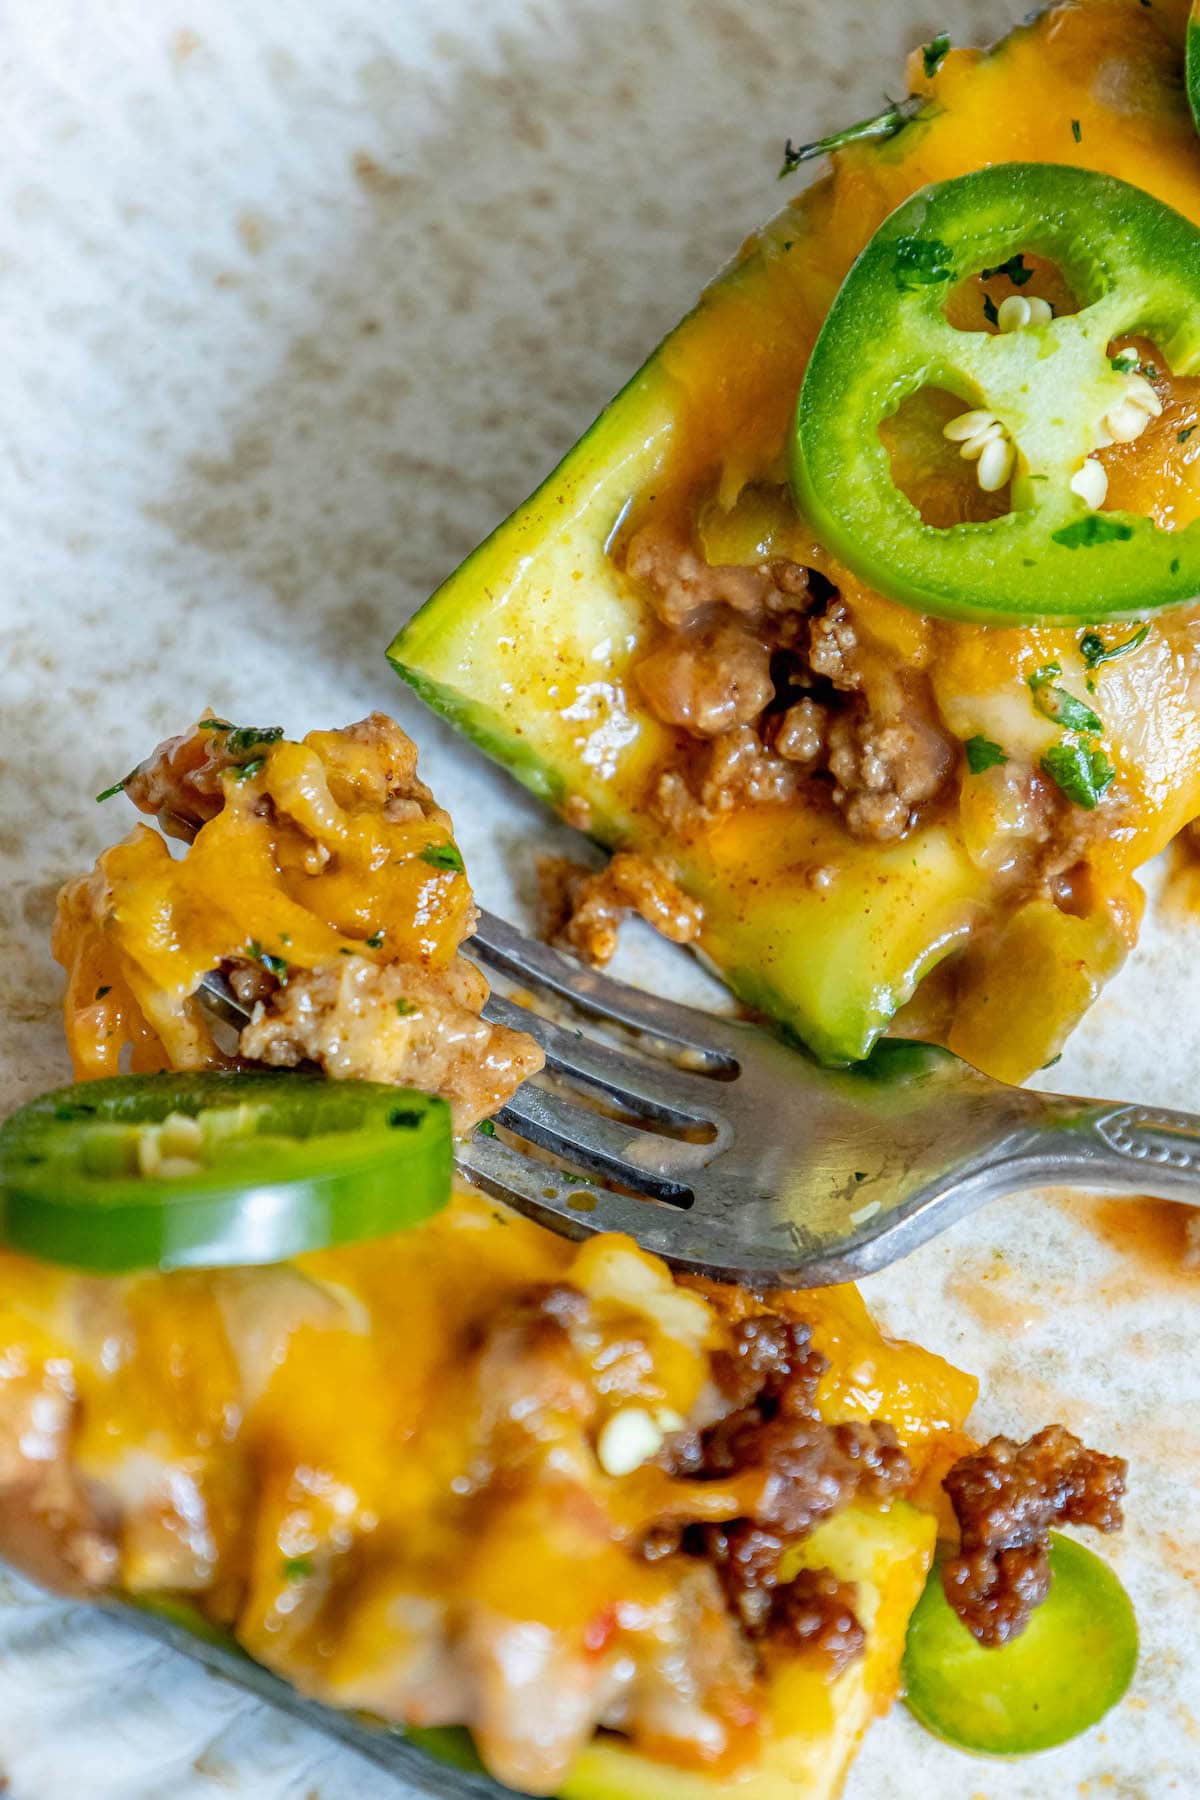 baked zucchini with cheesy taco filling in it